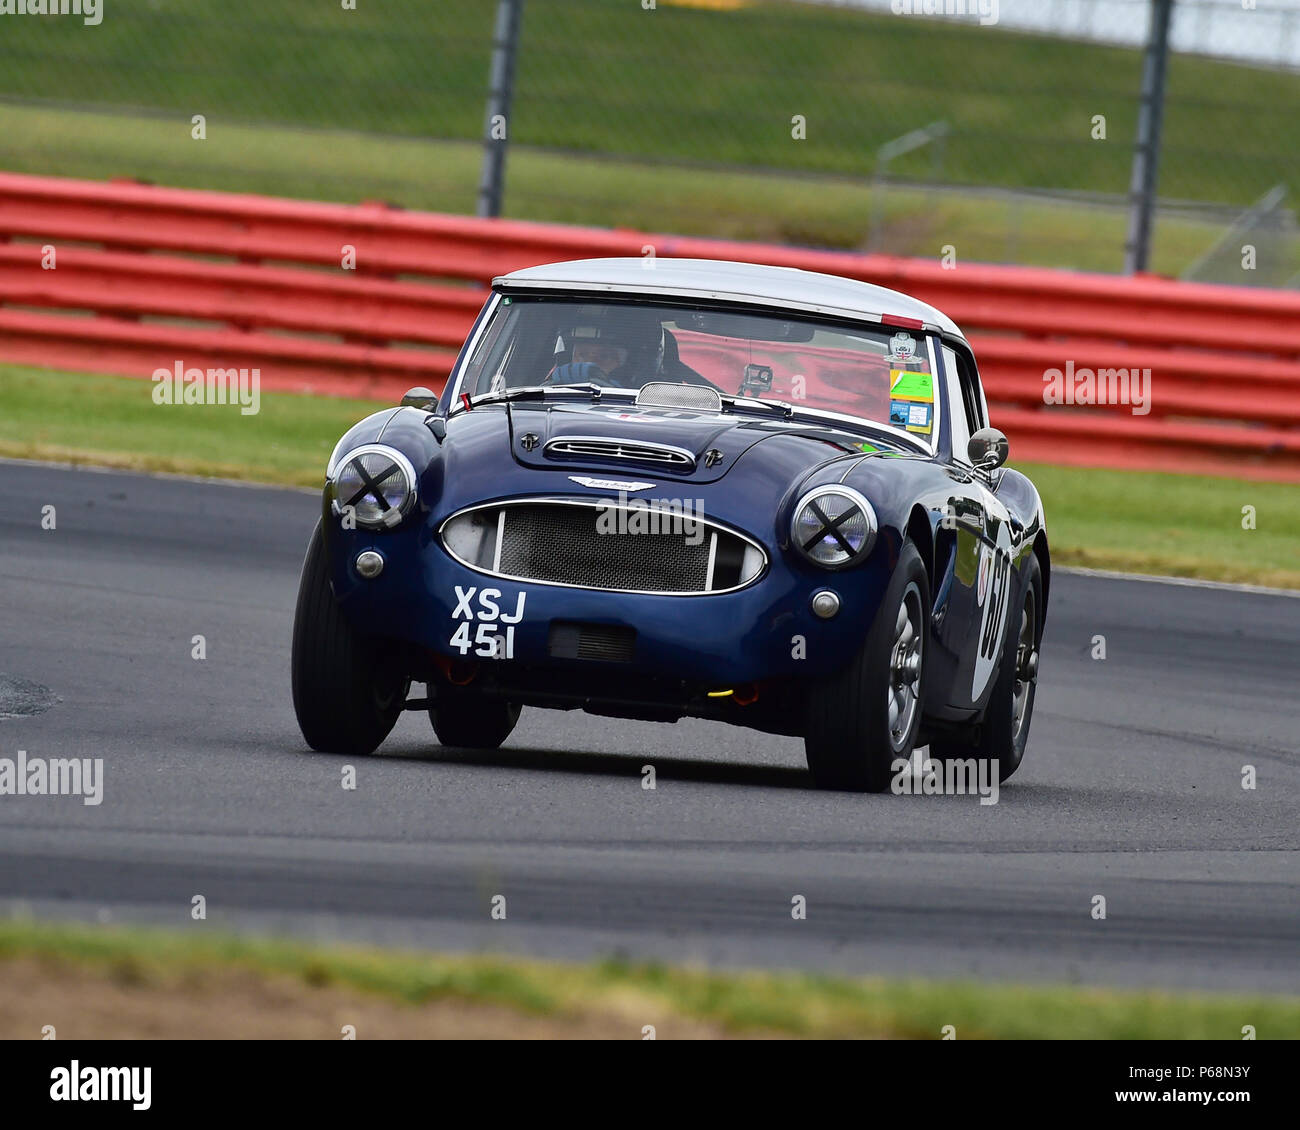 Andrew Hayden, Austin Healey 3000 Mk3, Guards Trophy, Sports Racing Cars, GT cars, Pre 66 GT Cars, Pre 69 sports racing cars, Silverstone Internationa Stock Photo